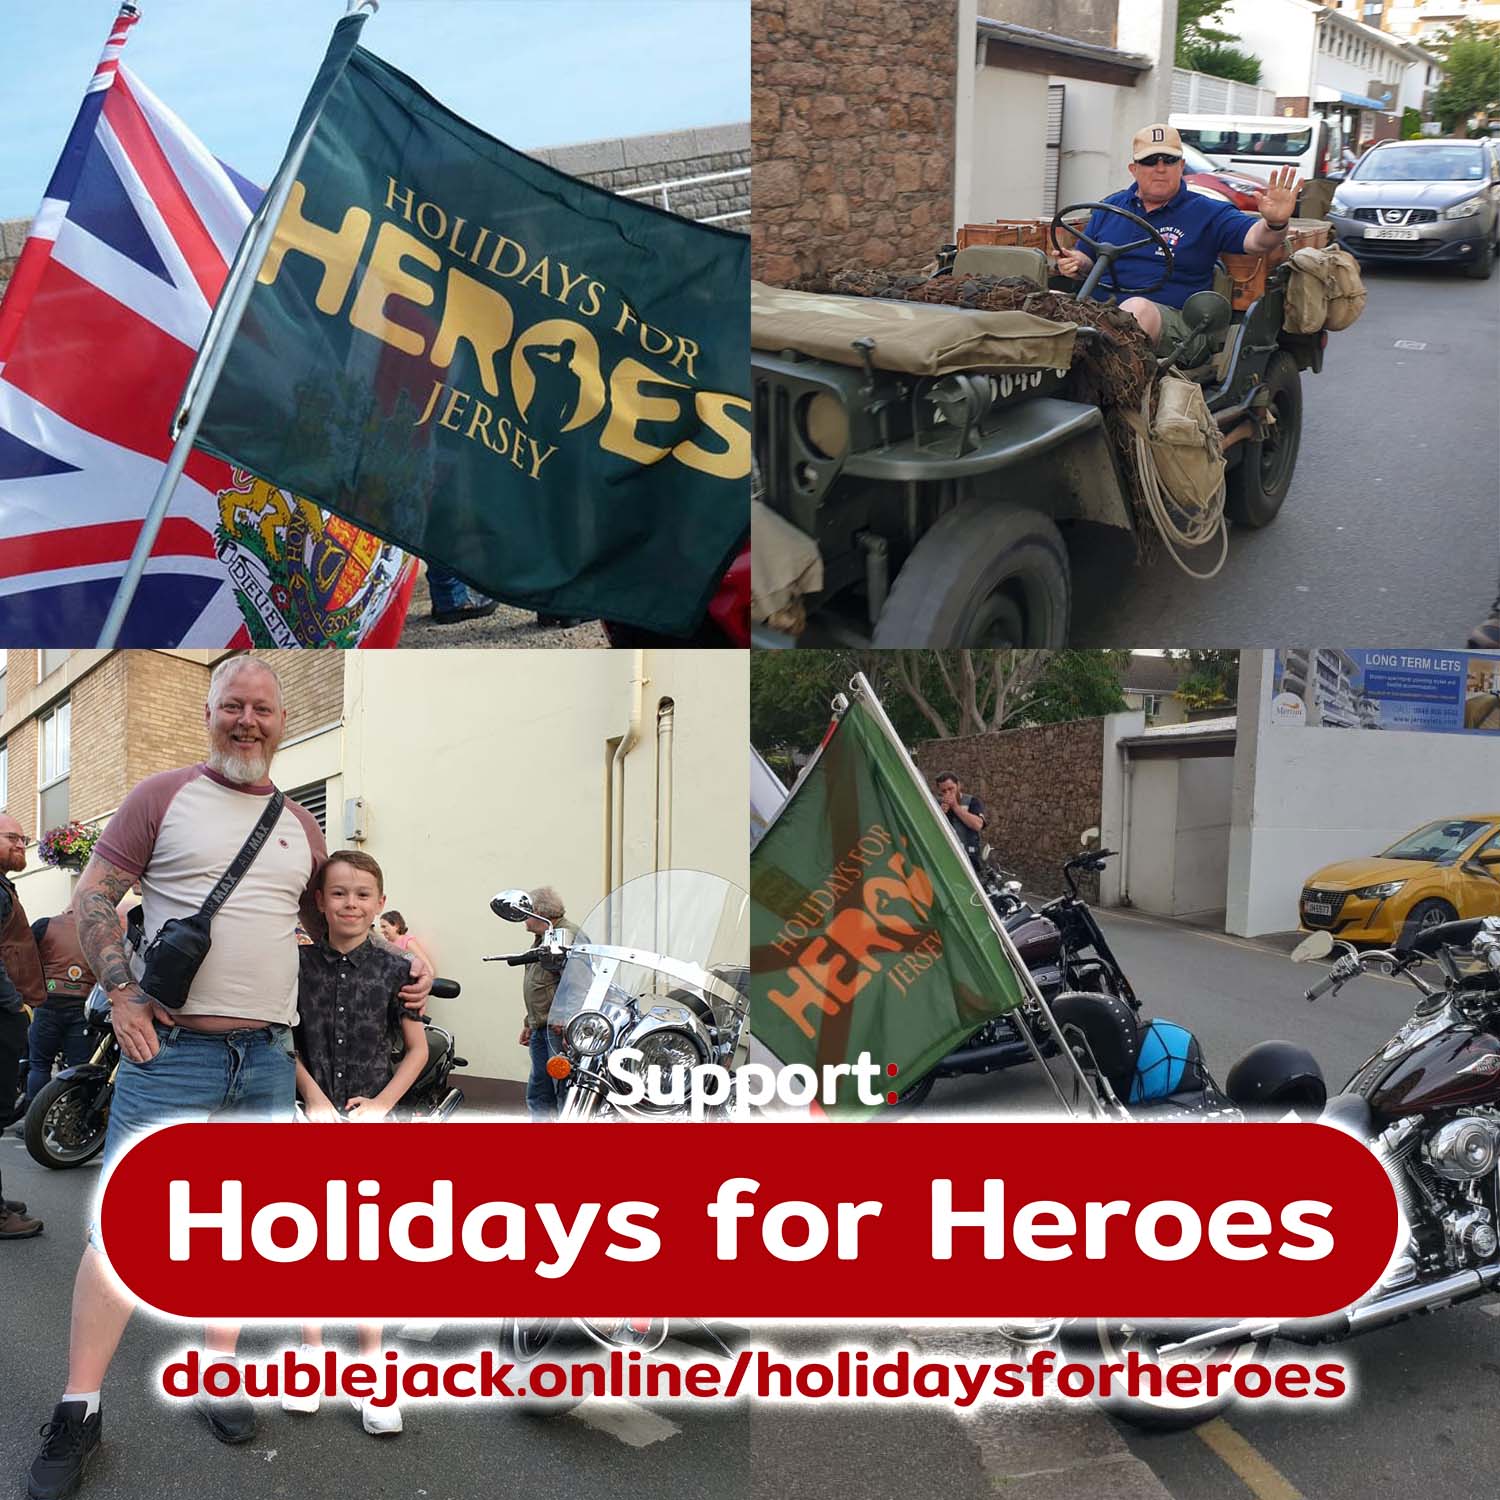 Holidays for Heroes 2022 supported by doublejack.online